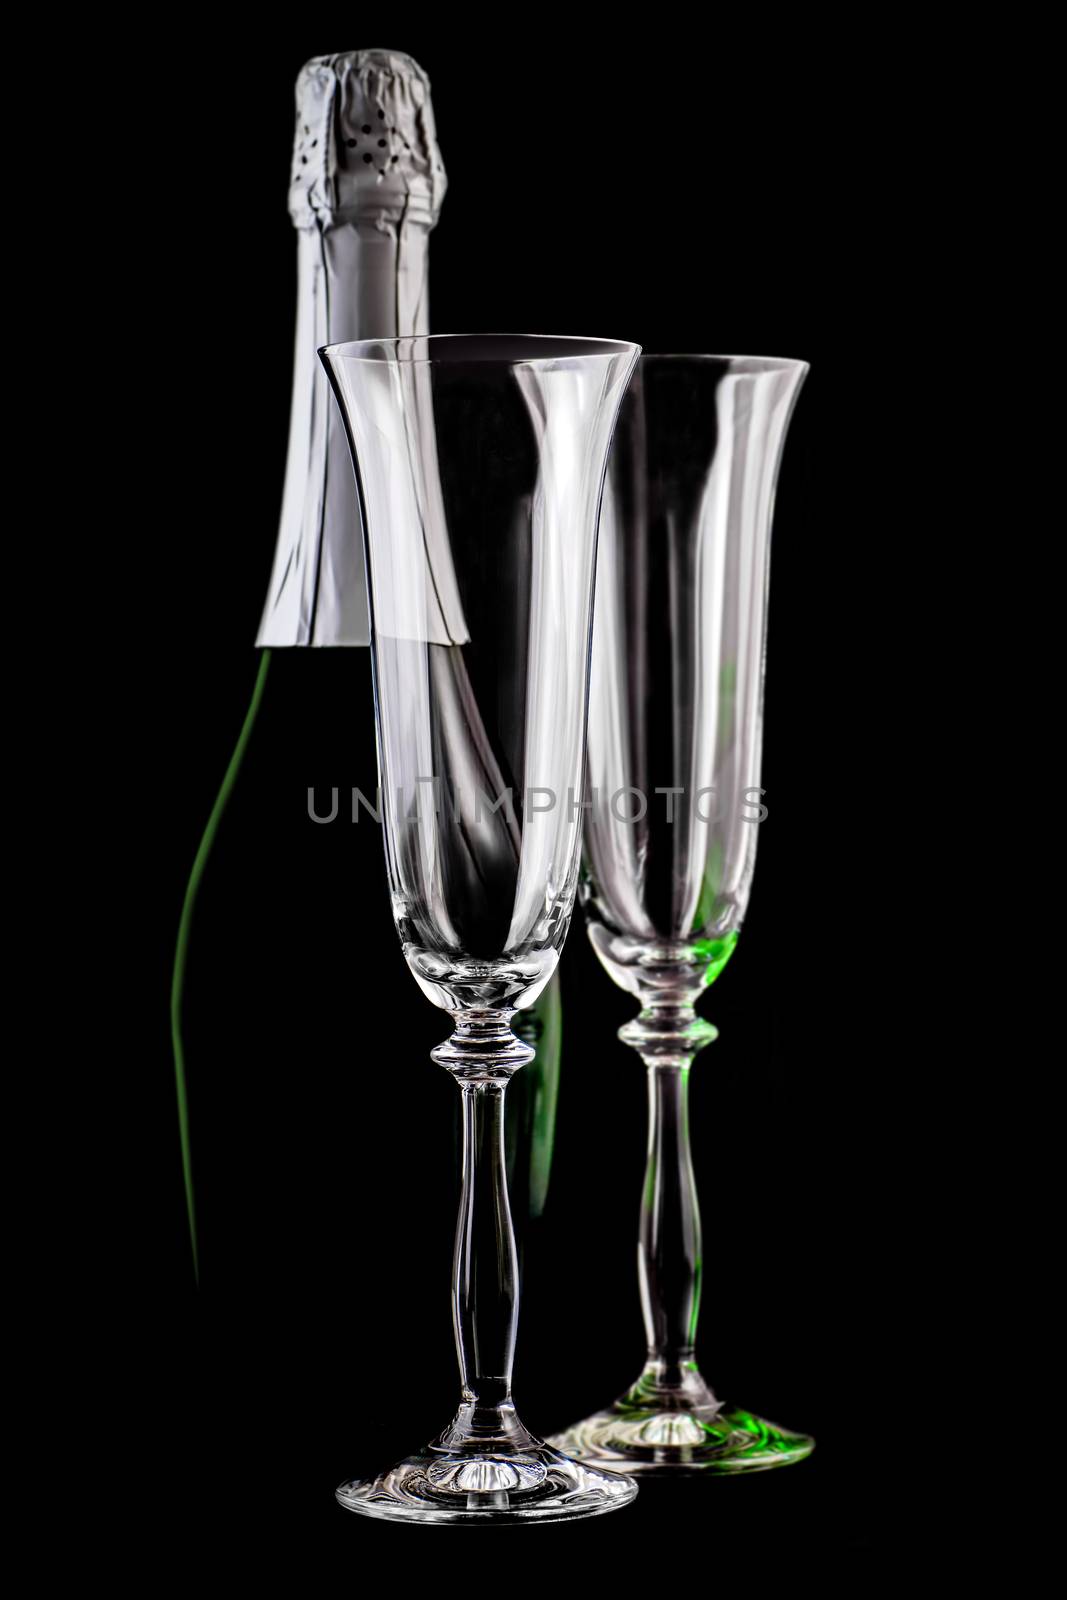 bottle of champagne and empty glasses on a dark background